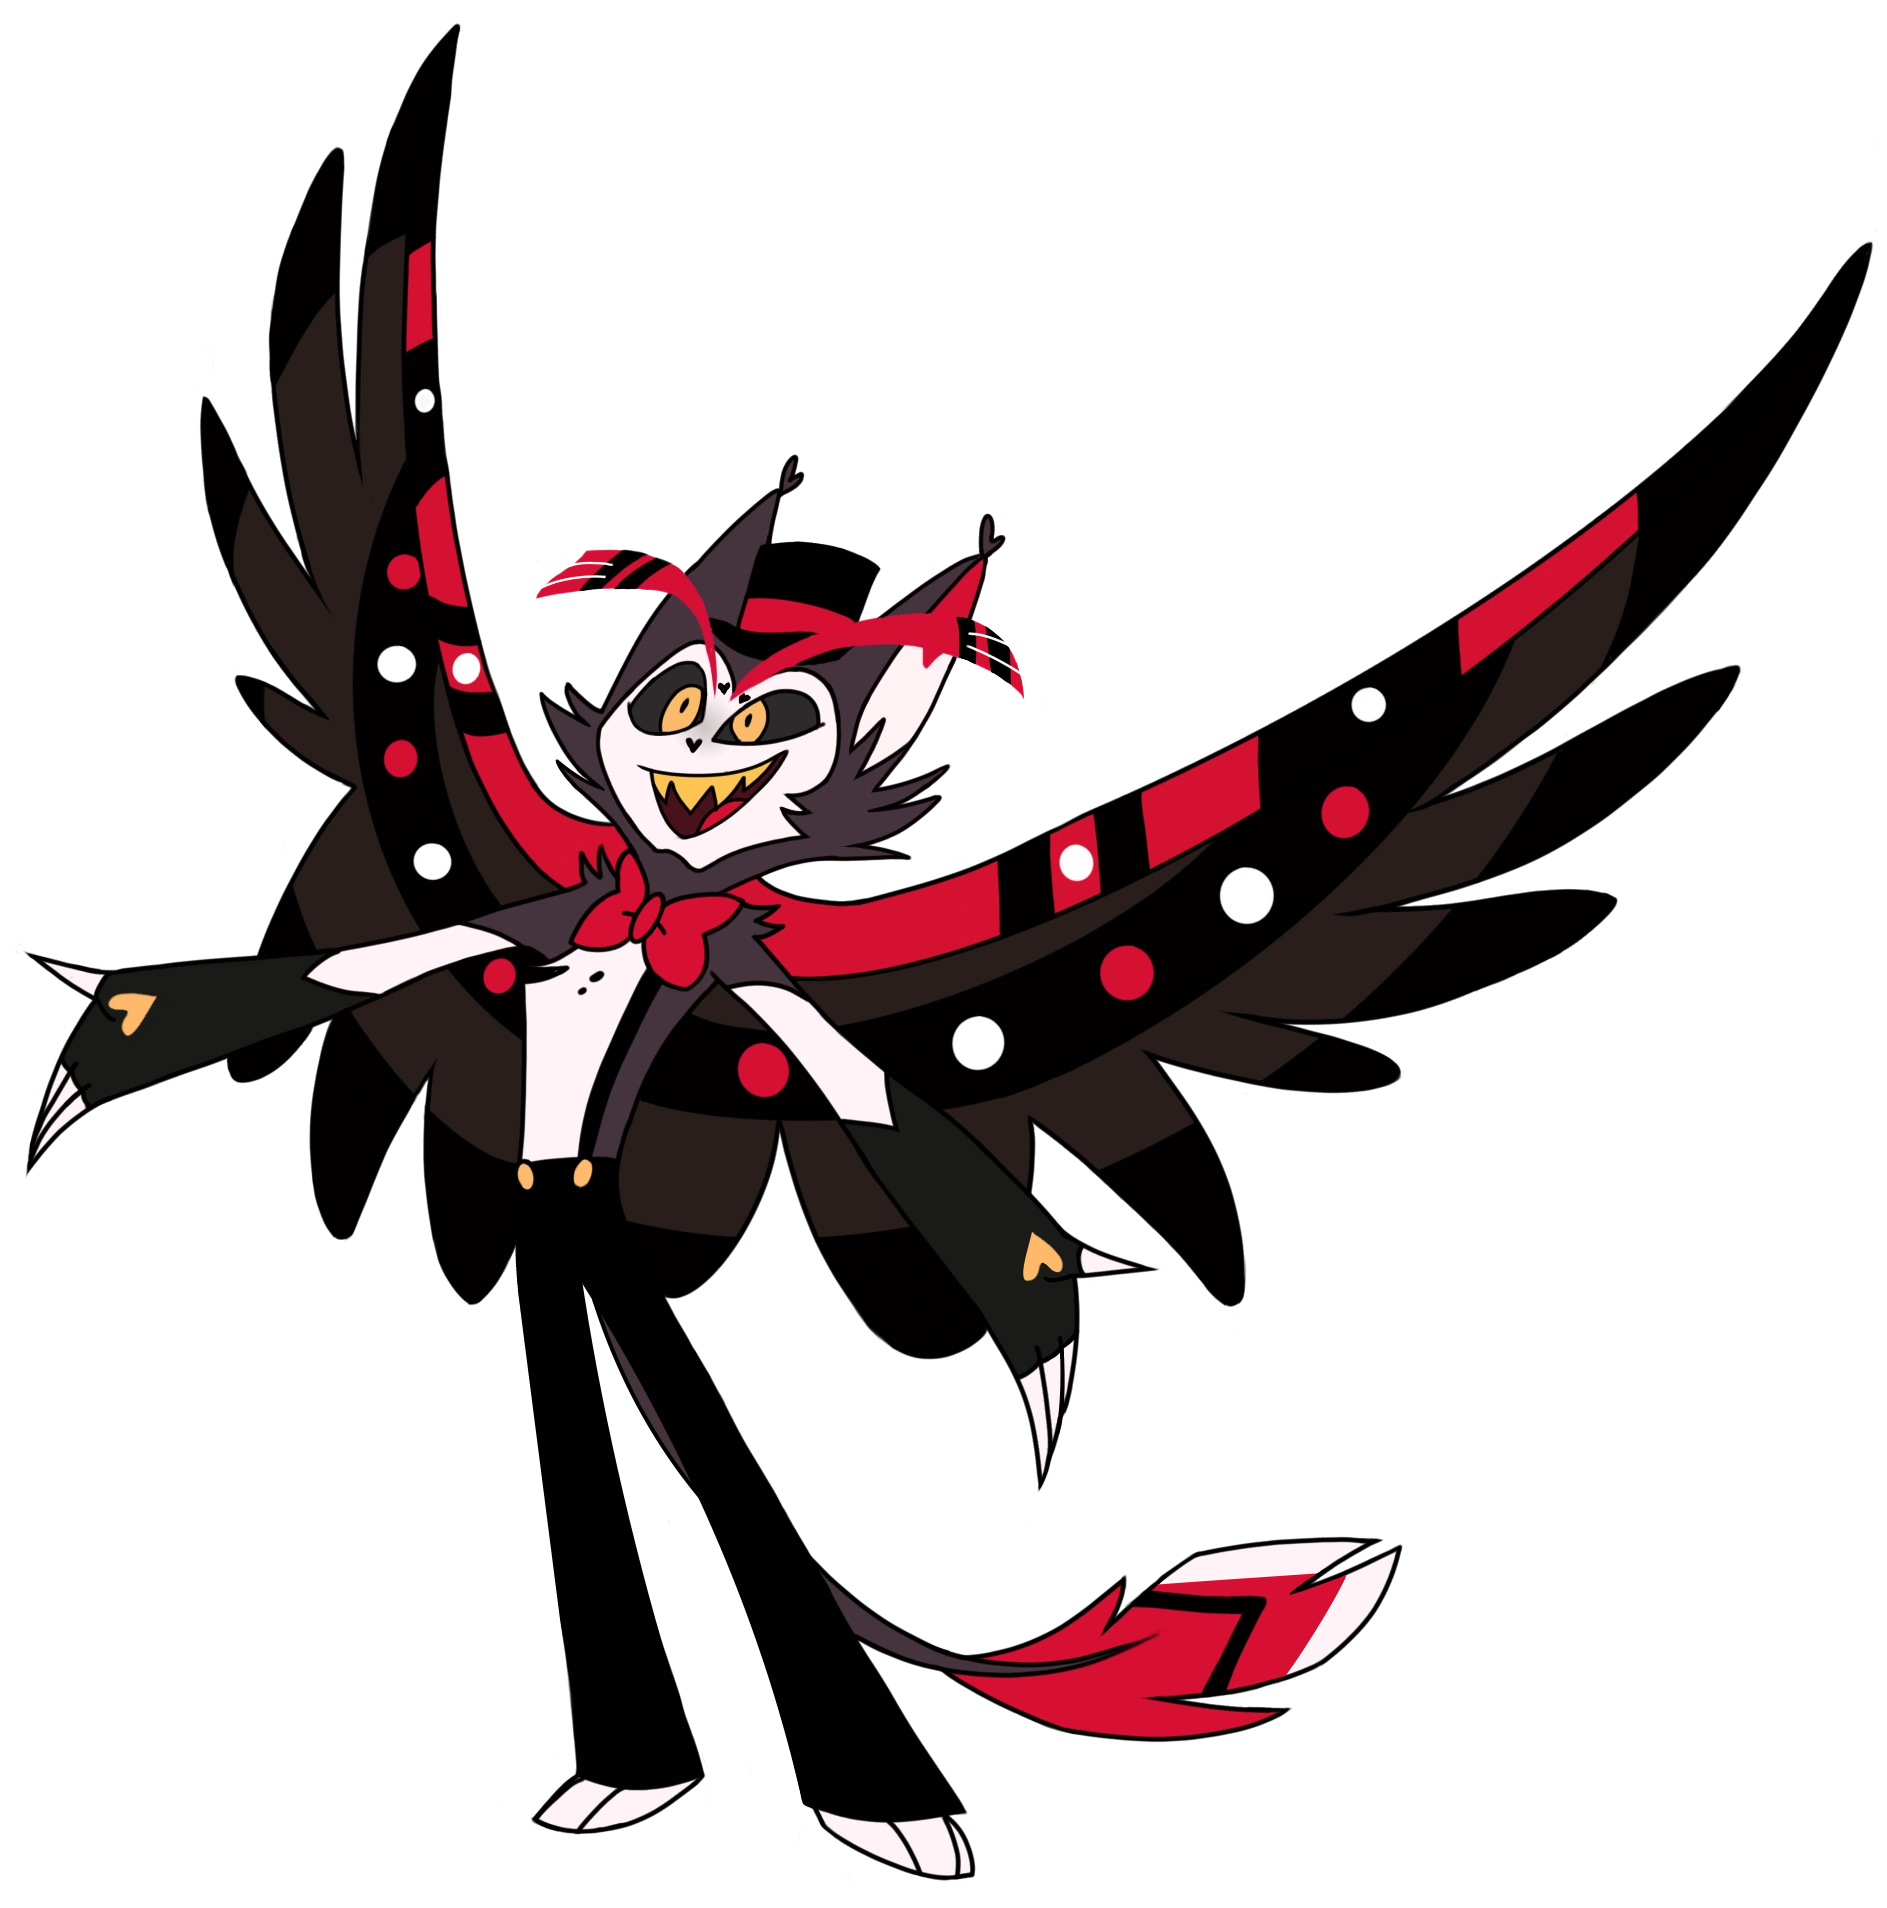 https://static.wikia.nocookie.net/hazbinhotel/images/5/59/Husk_by_Theresivy.png/revision/latest?cb=20230929143243